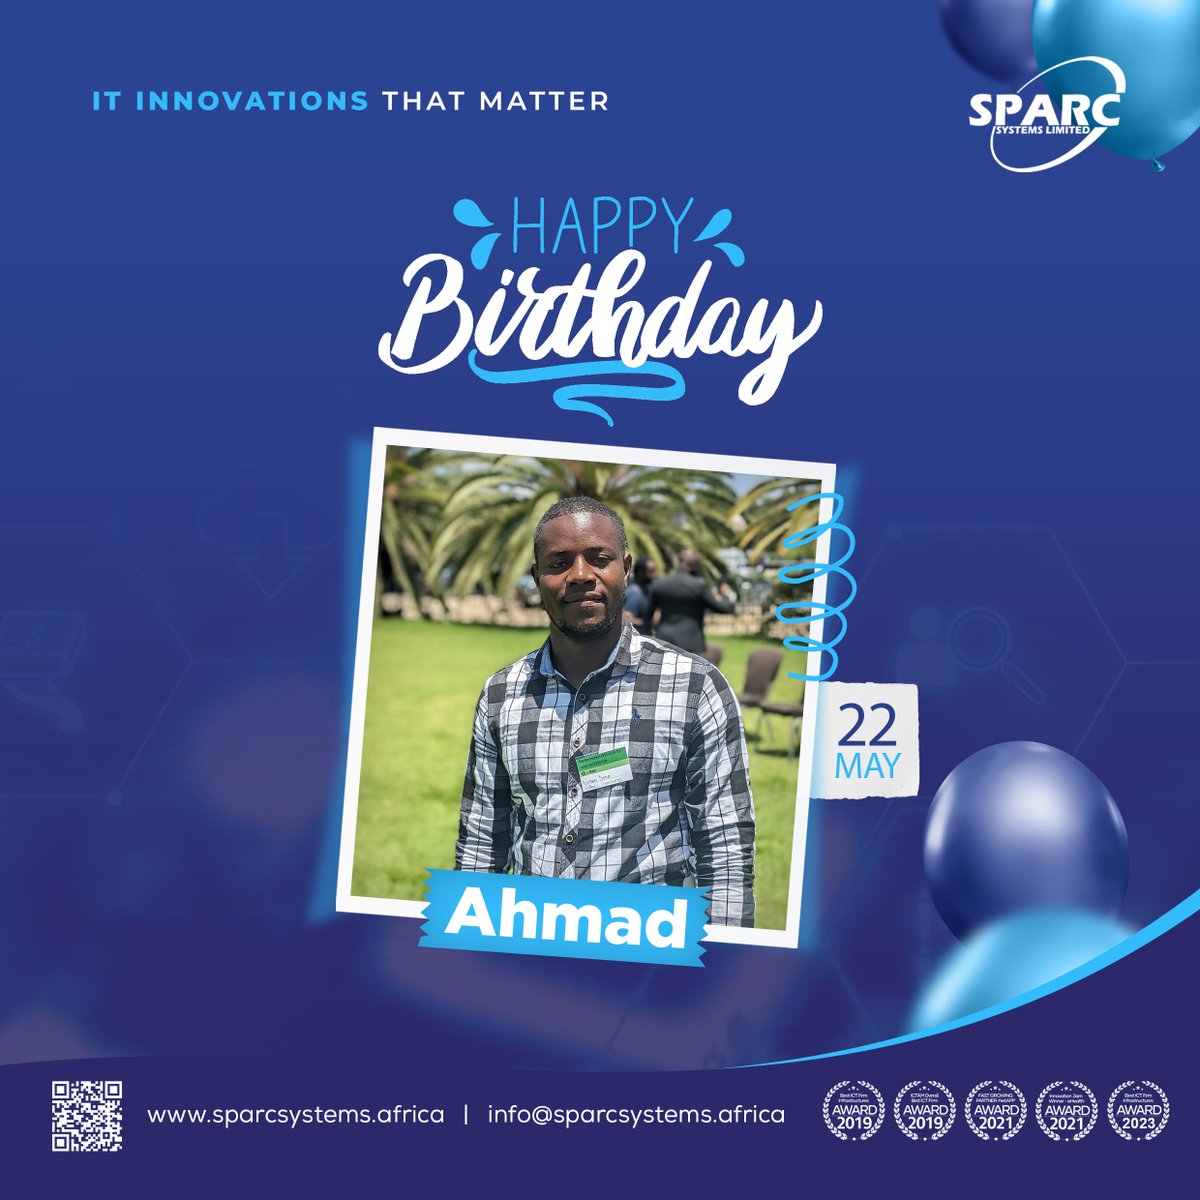 Happy birthday to our amazing Zambian team member! Wishing a fantastic day to a talented individual making a difference in Africa's ICT landscape! Cheers from the entire SPARC family! #HappyBirthday #ICTAfrica #Zambia #sparctheundisputed